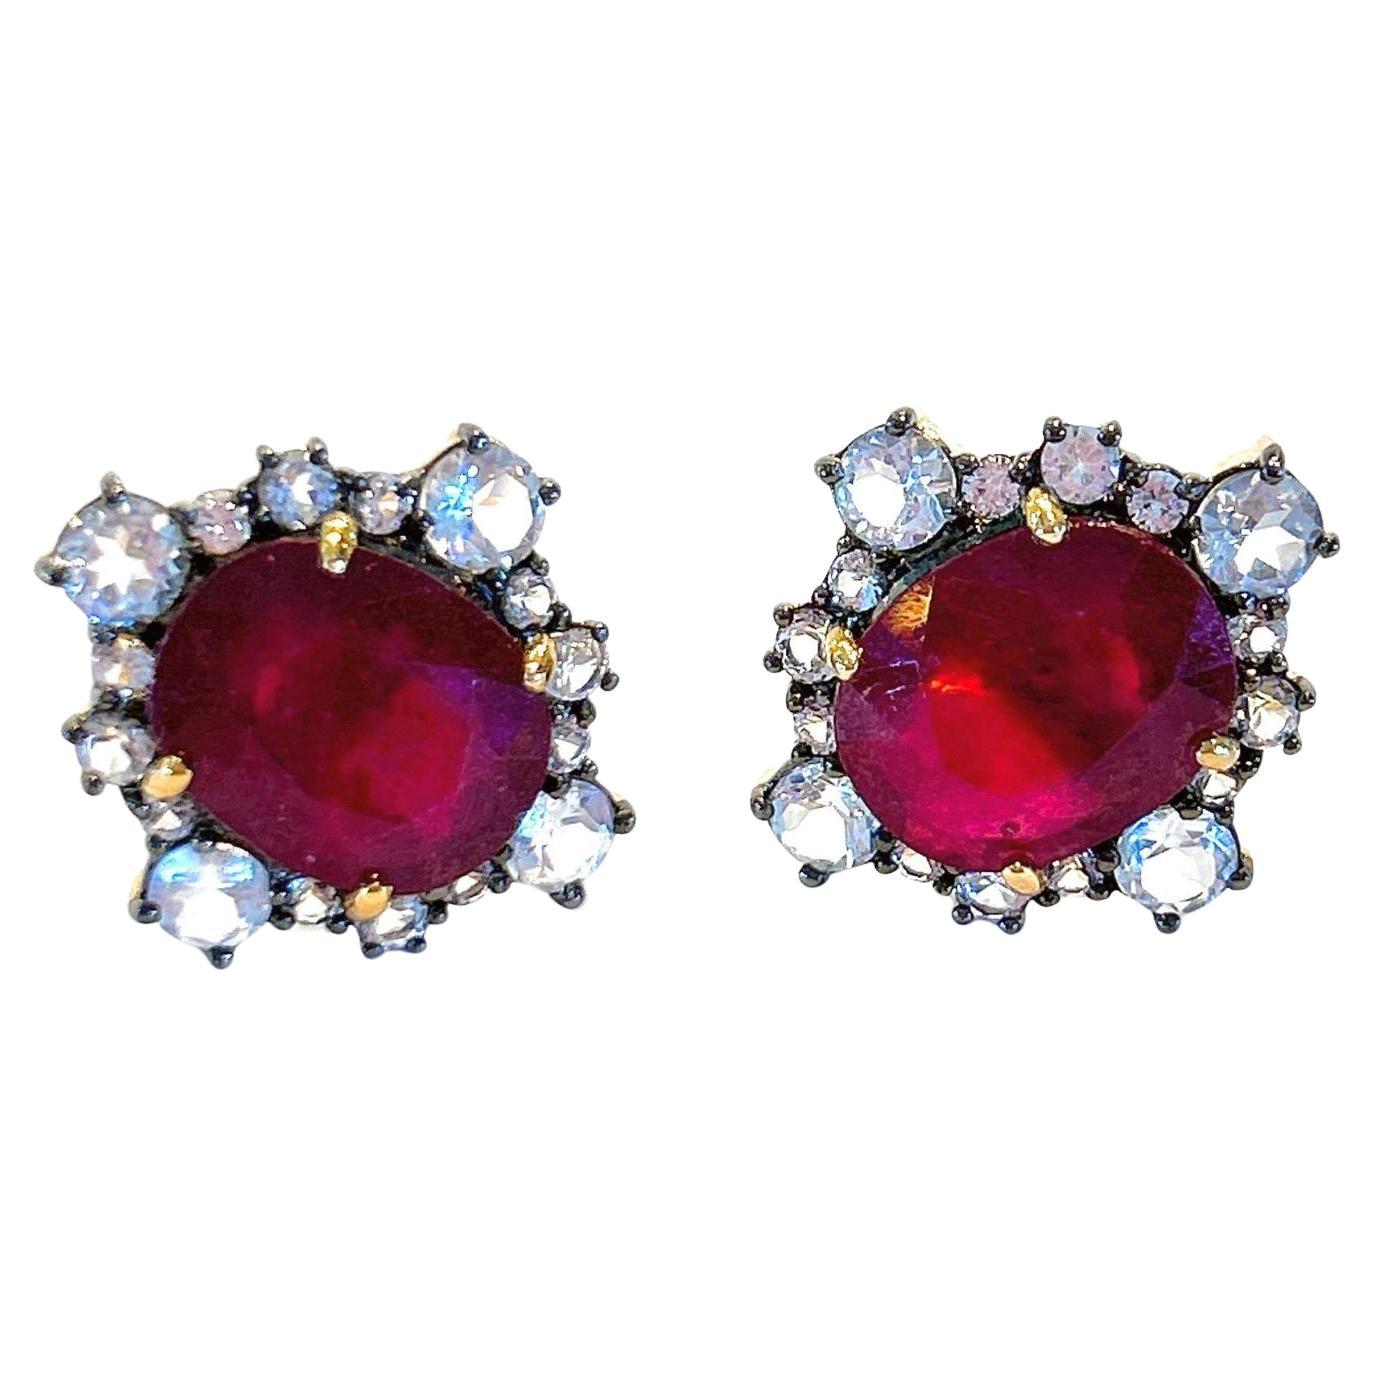 Bochic “Orient” African Ruby & Rose Cut Topaz Earrings Set In 18K Gold & Silver 
Natural African Ruby Gem Cut - 11 carat 
Shape - Oval shape 
Color - deep wine 
White Topaz Rose cut Natural White Topaz - 5 carat 
Rose cuts 
Cluster Rose cut setting